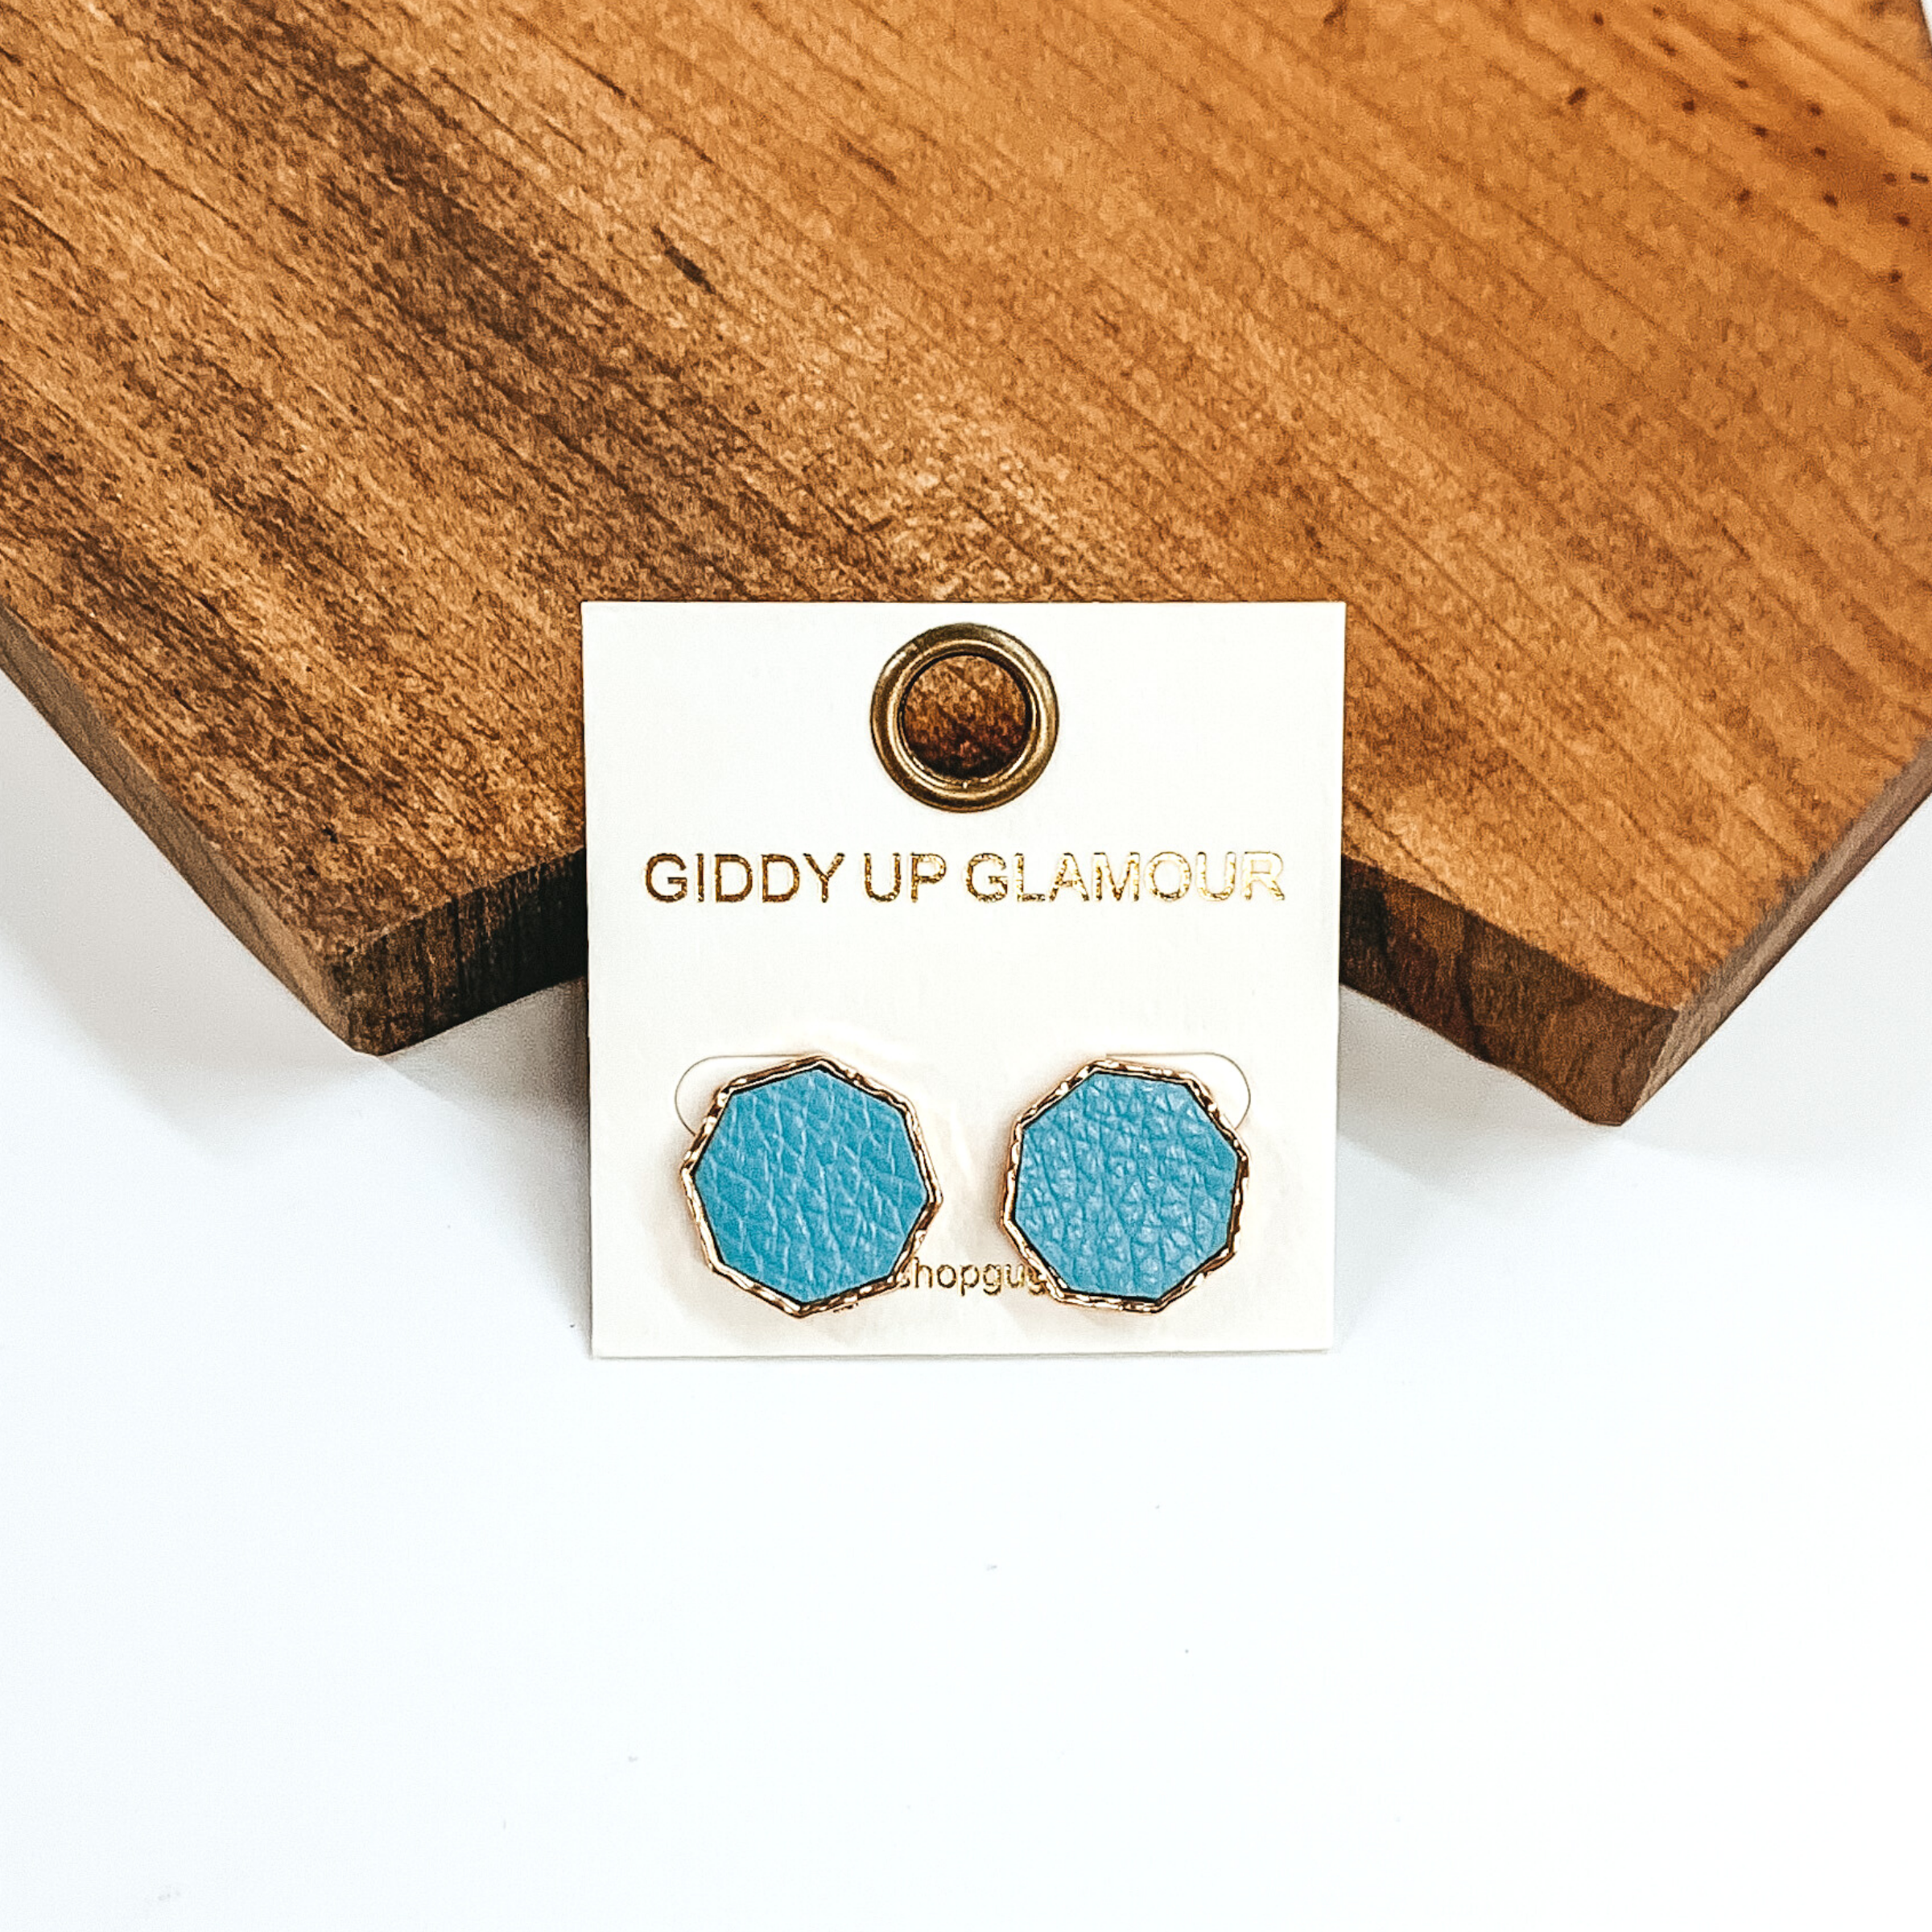 Gold, hexagon stud earrings with an pale blue leather like inlay. Pictured on a white background in front of a piece of wood.